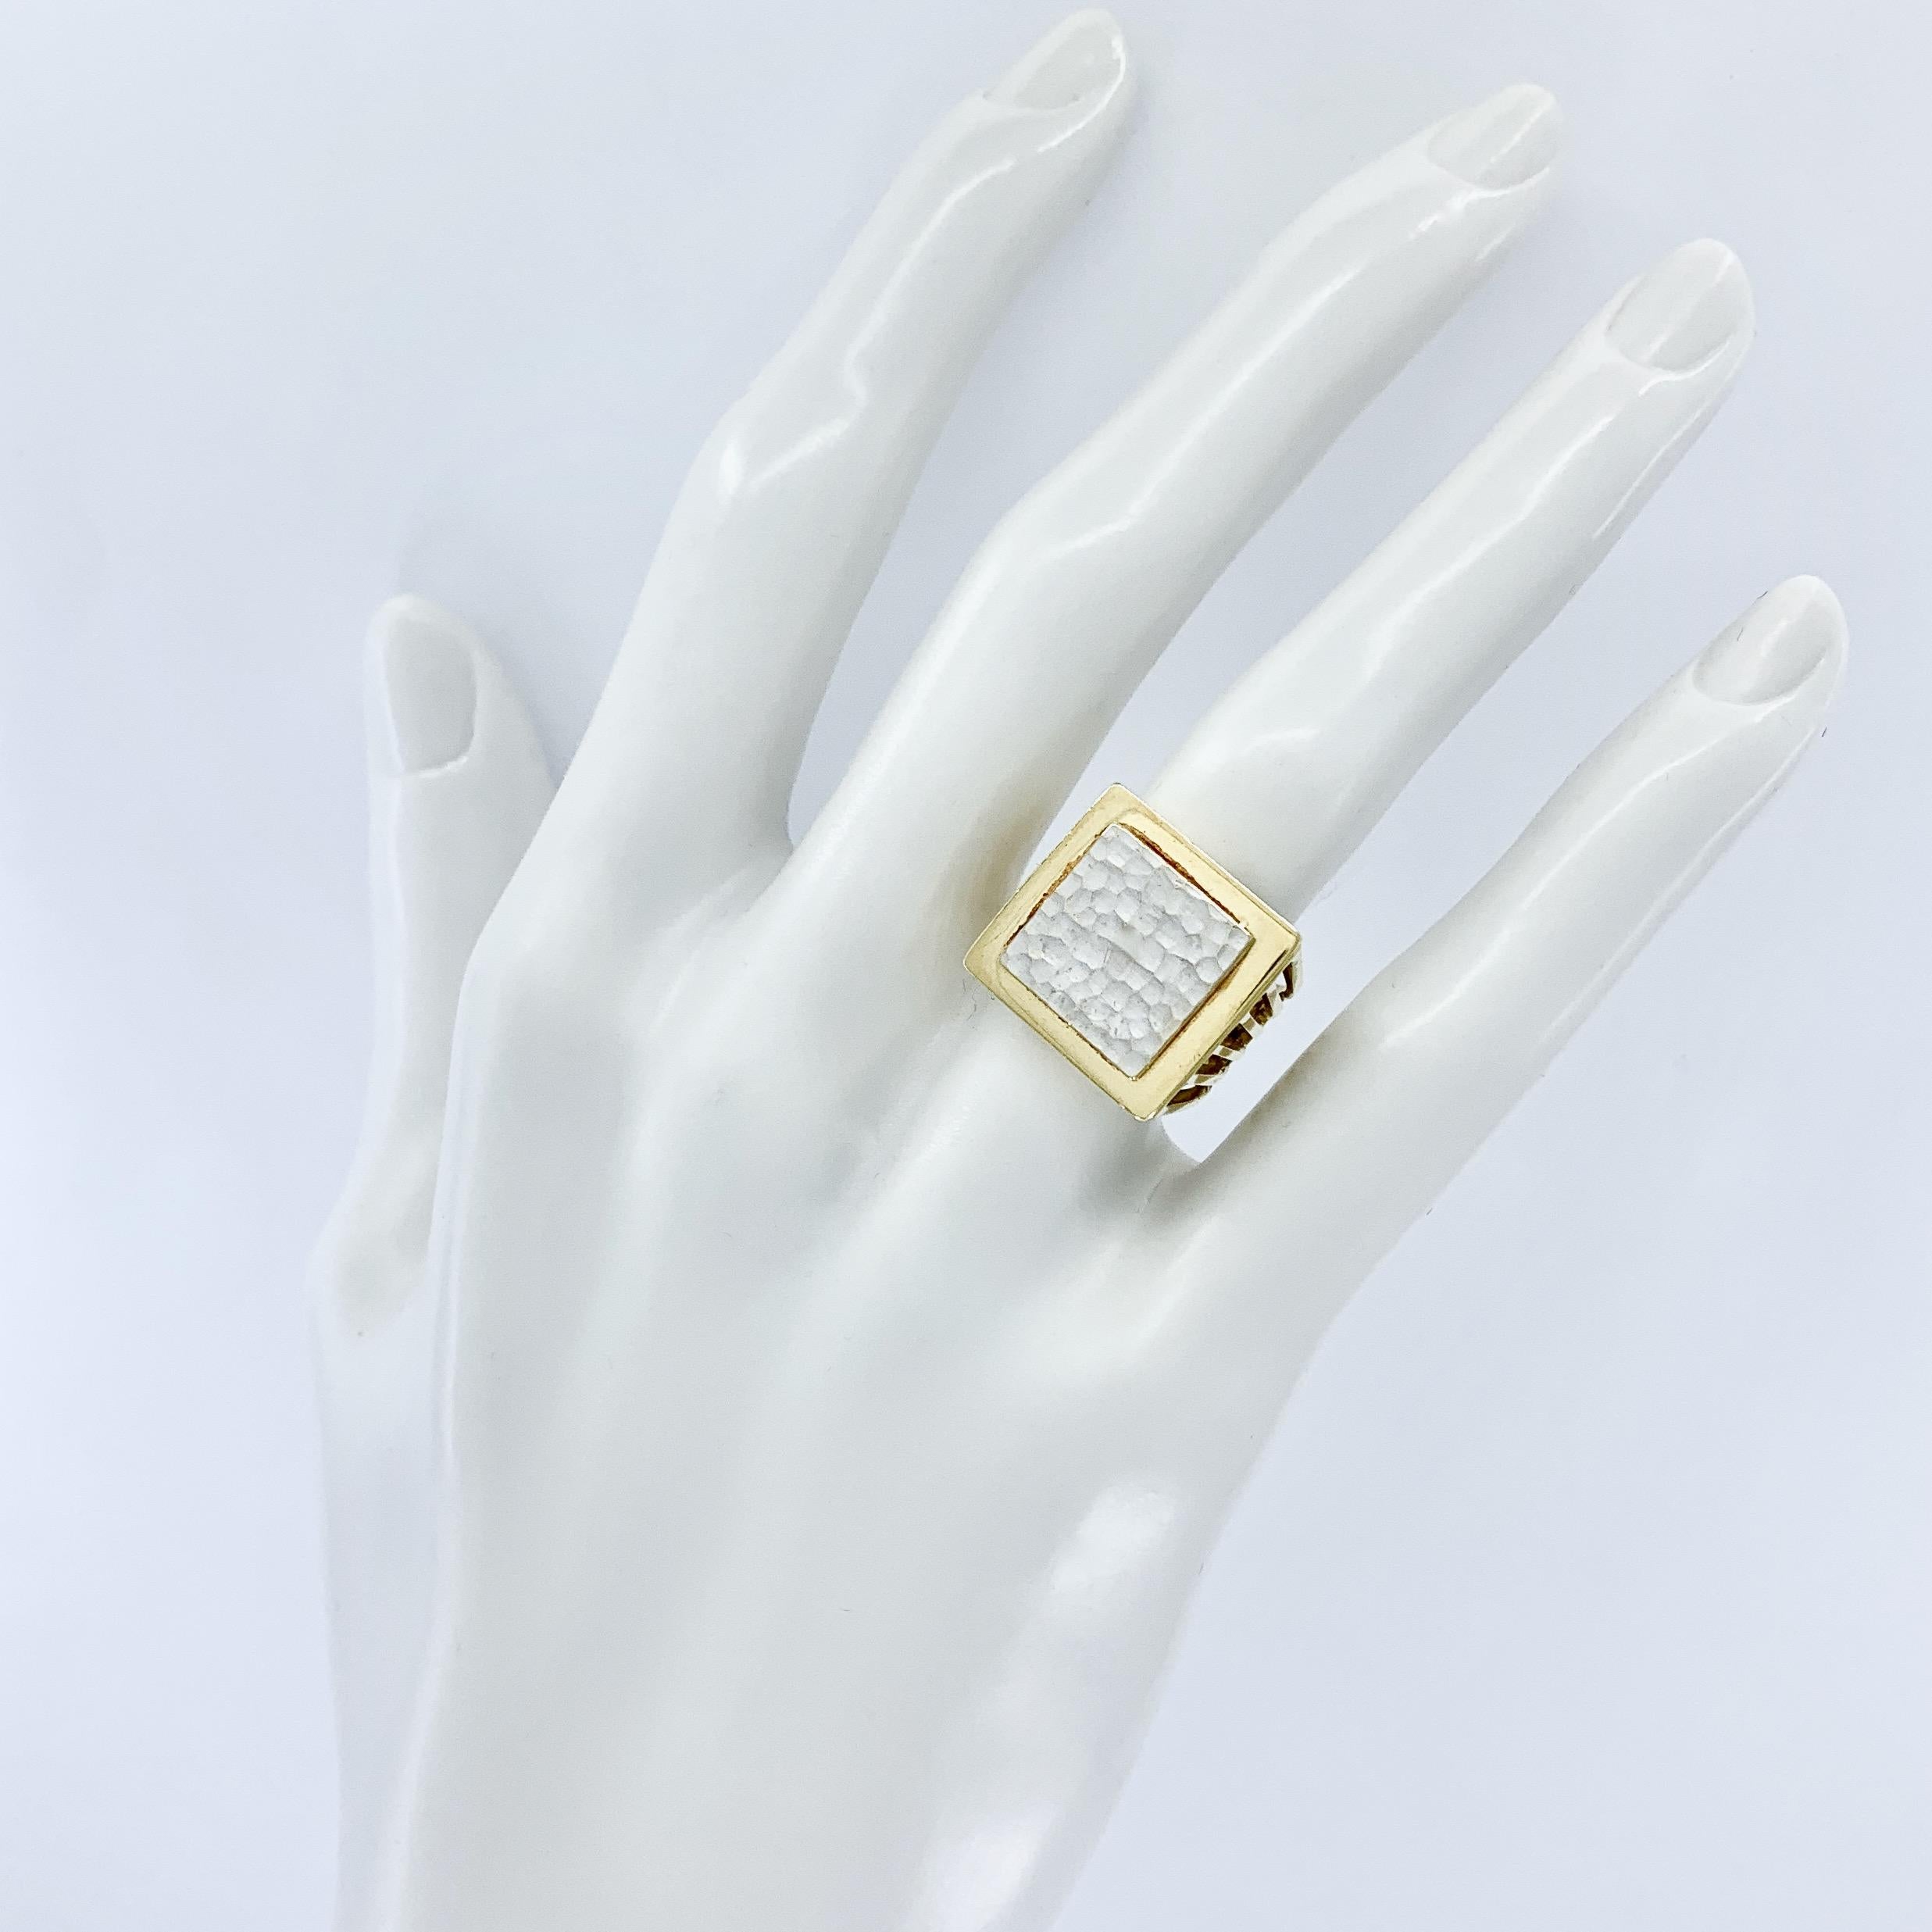 This strong, architectural ring features a square, engraveable slab of hammered white gold set in a polished yellow gold D-shaped ring with wide, slatted sides tapering to a solid back.  Great contrast in colors and textures, all in 18 karat